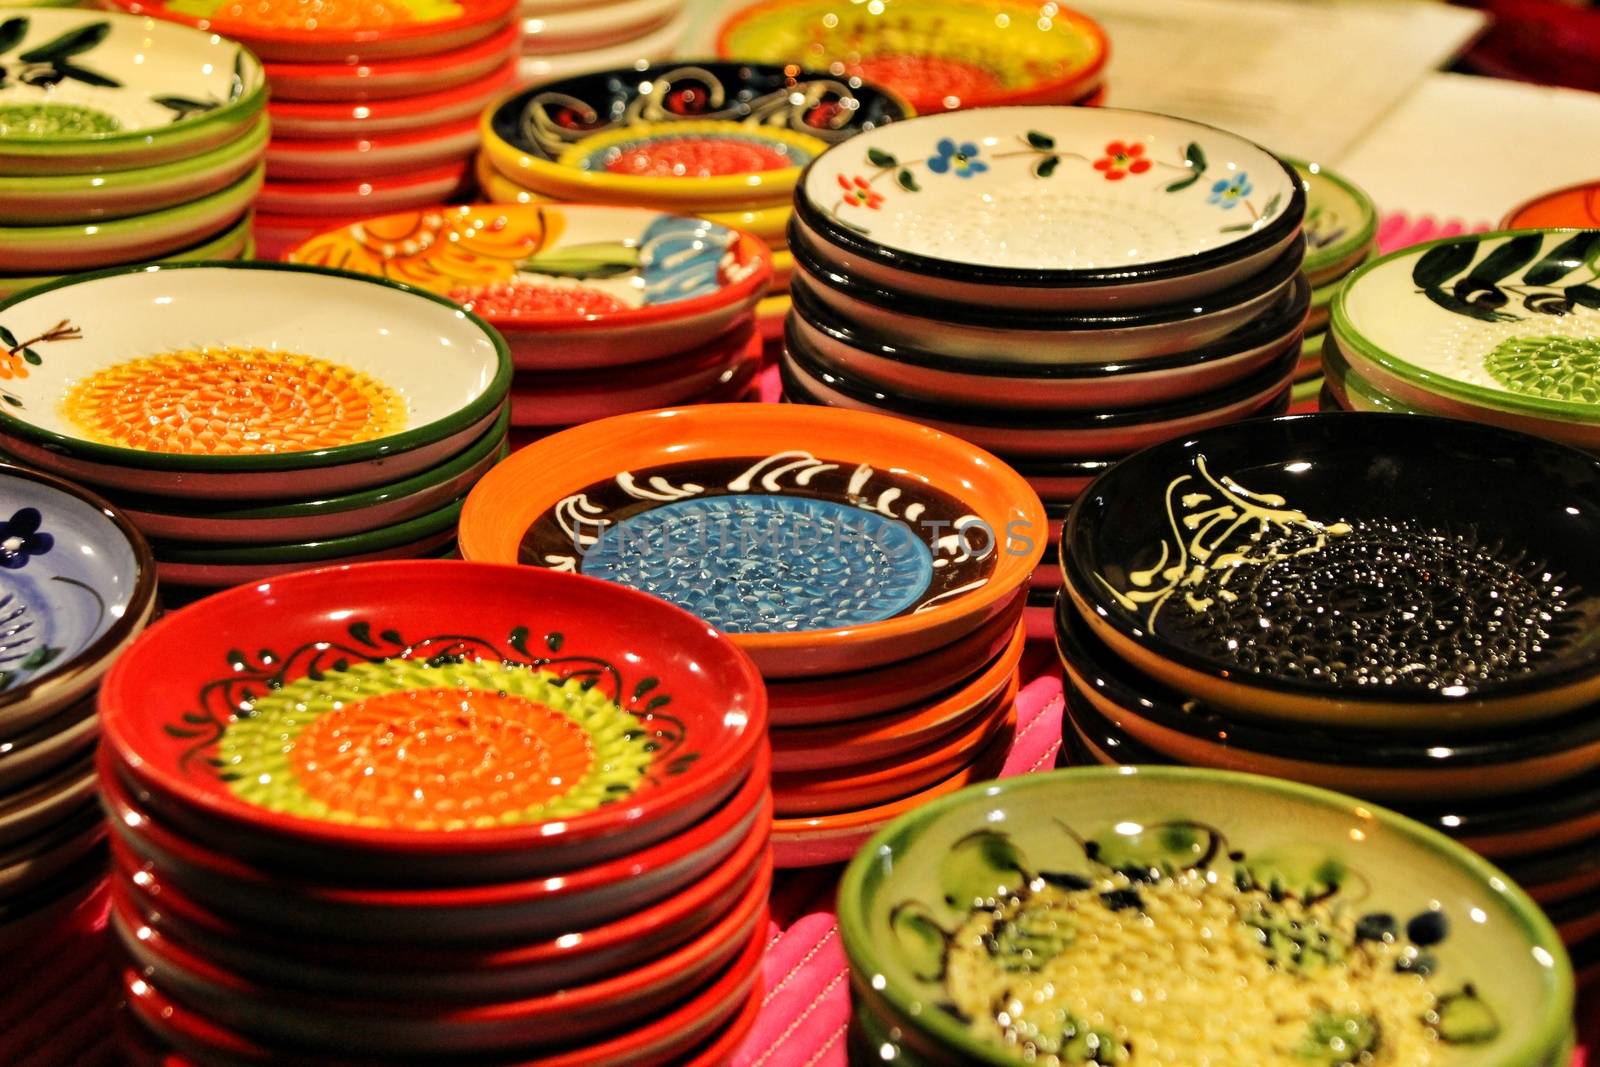 Ceramic plates for sale at a market stall by soniabonet